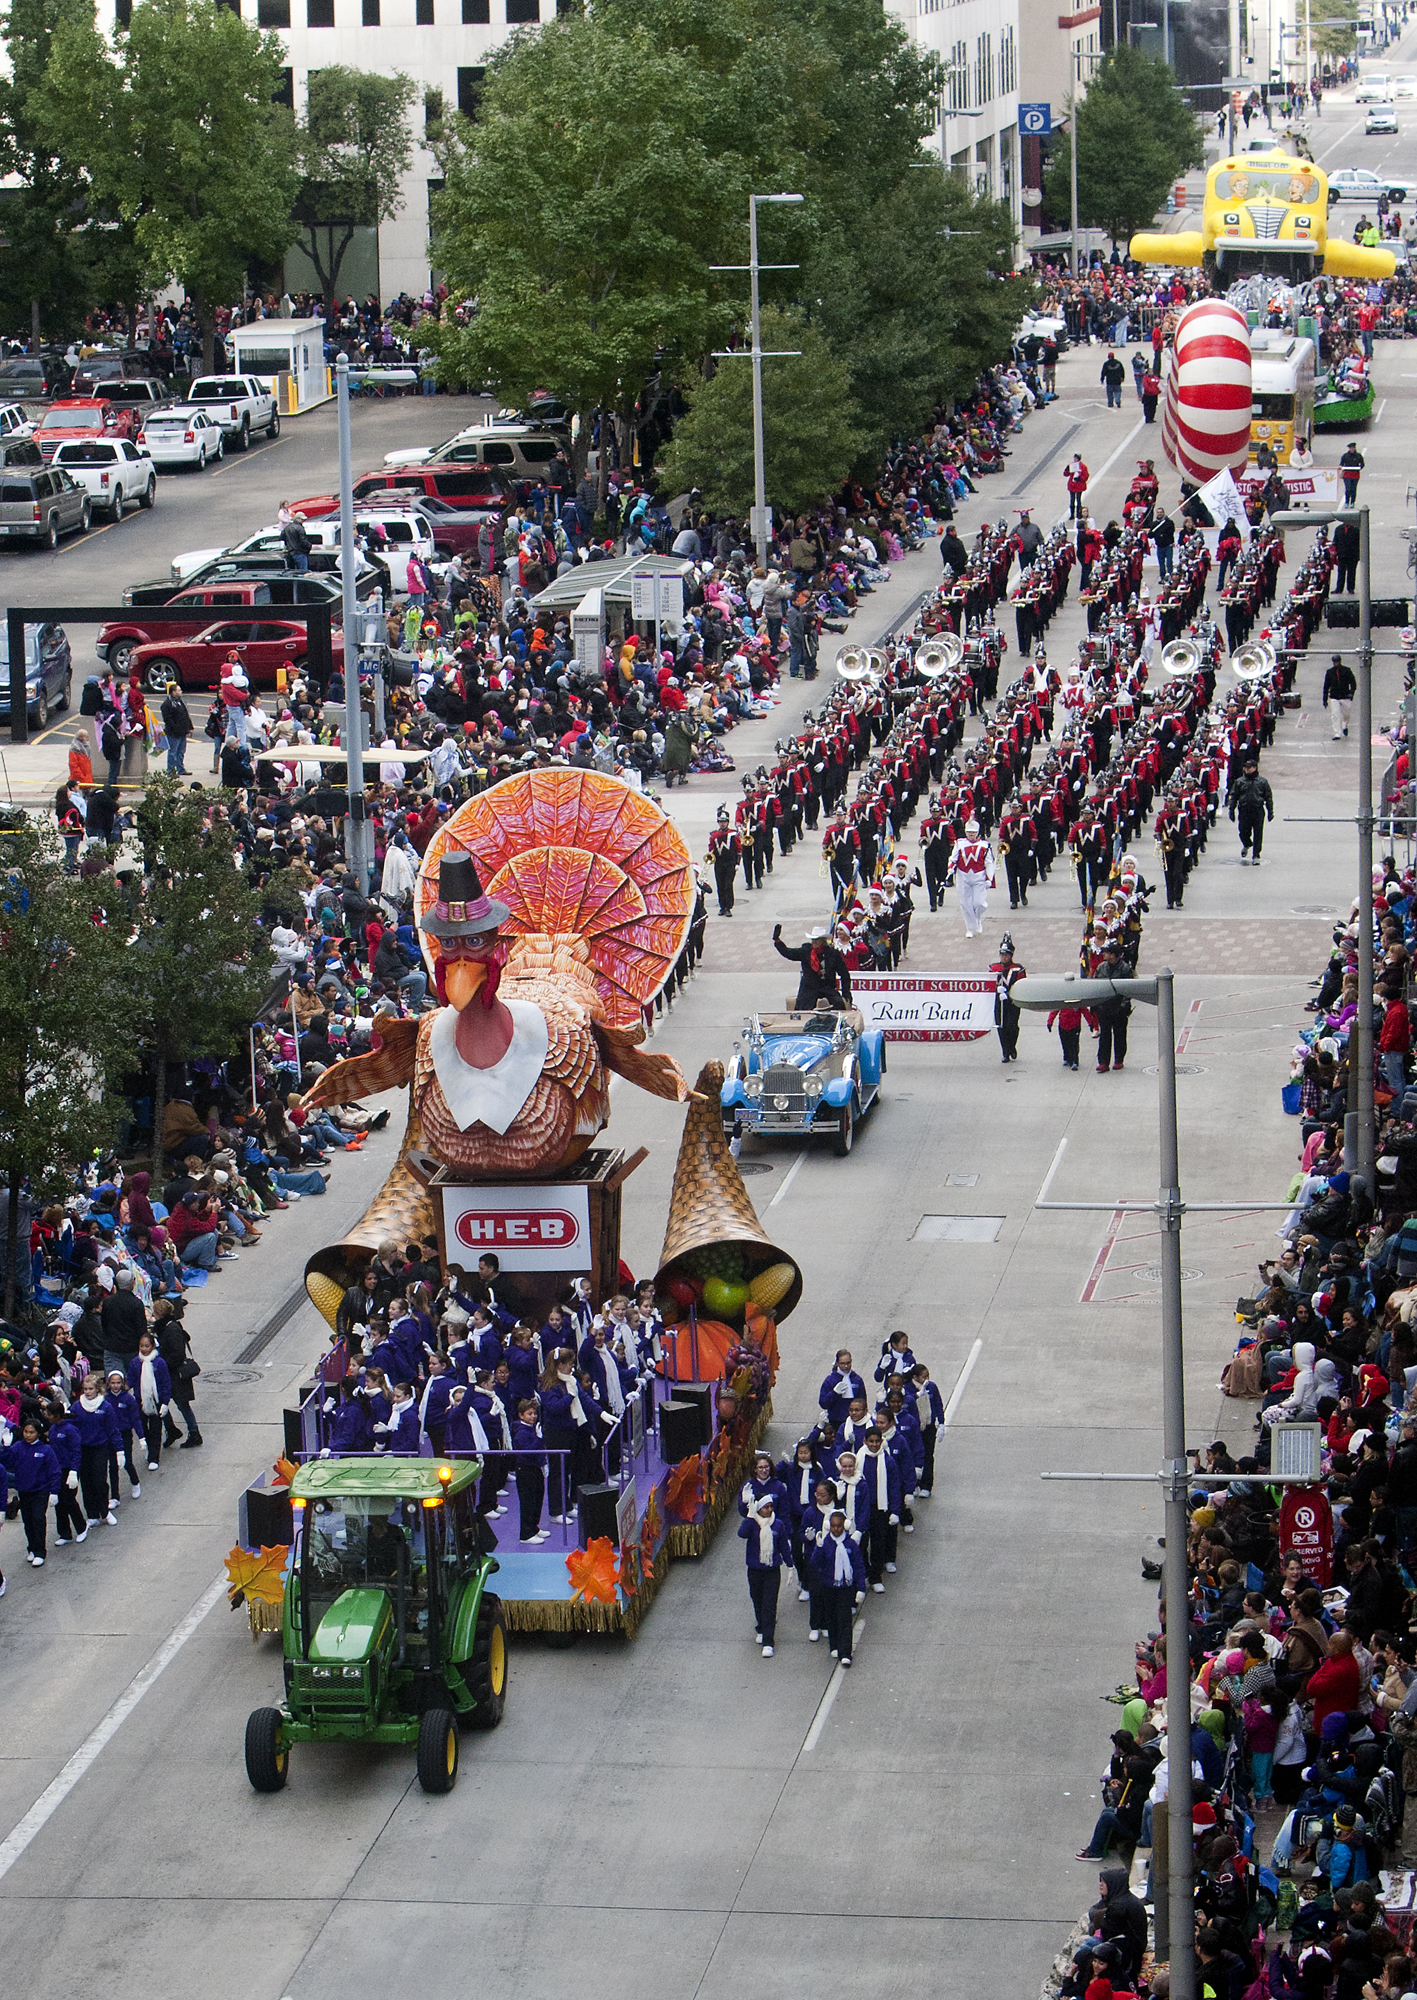 WATCH: 69th Annual H-E-B Thanksgiving Day Parade in downtown Houston